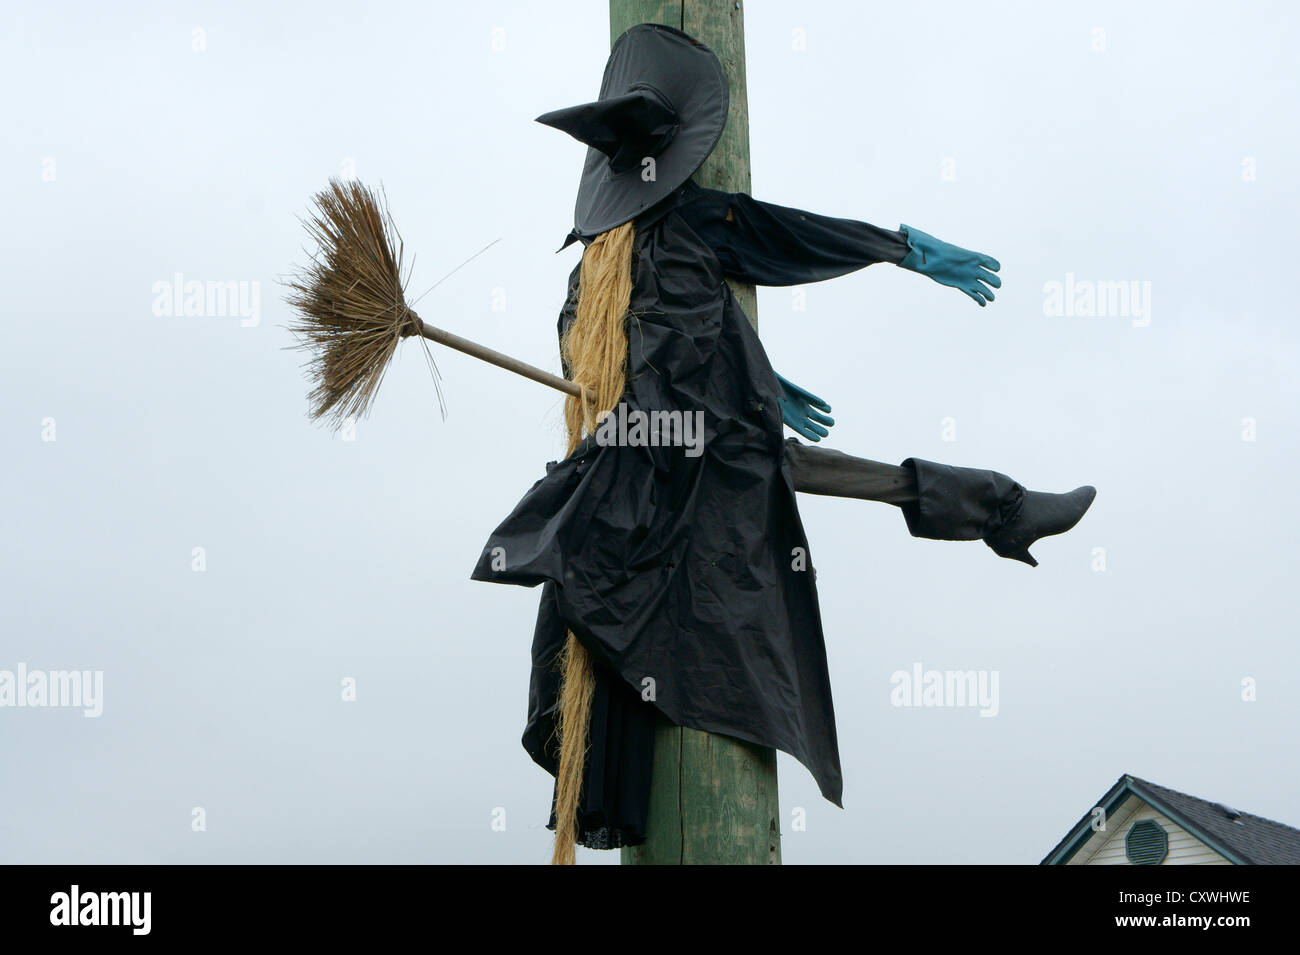 Humorous Halloween sculpture of an unlucky flying witch hitting a telephone pole Stock Photo